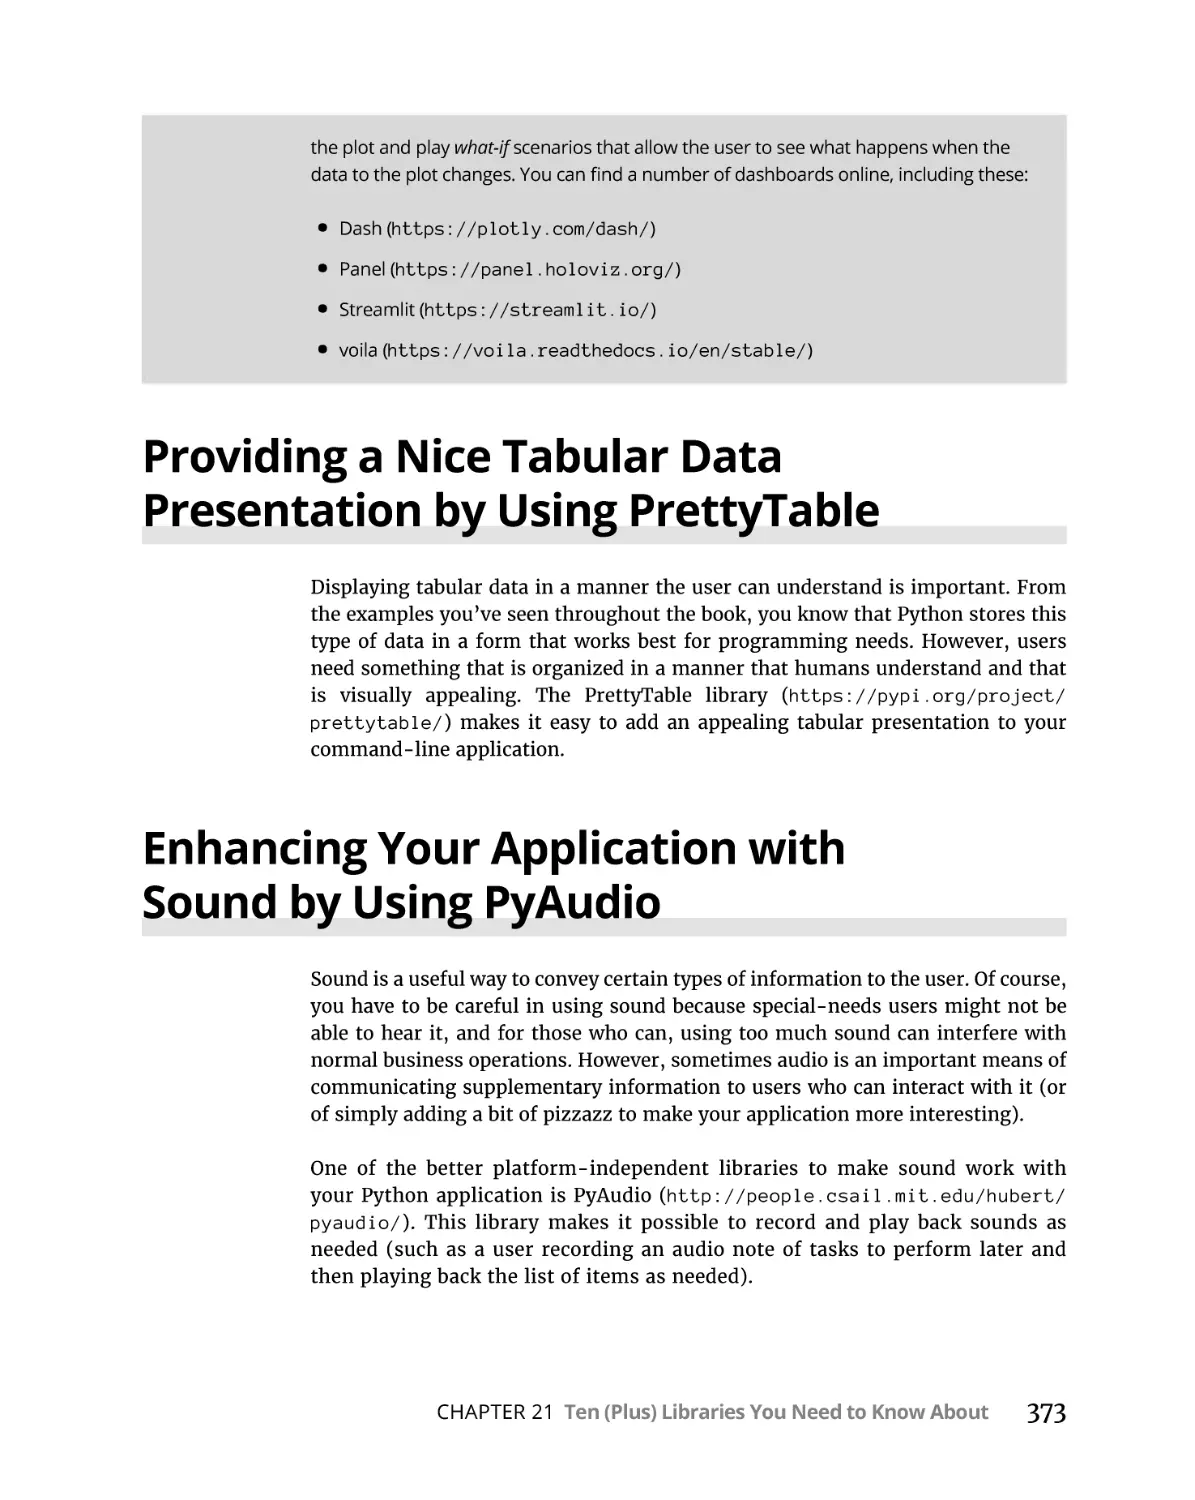 Providing a Nice Tabular Data Presentation by Using PrettyTable
Enhancing Your Application with Sound by Using PyAudio